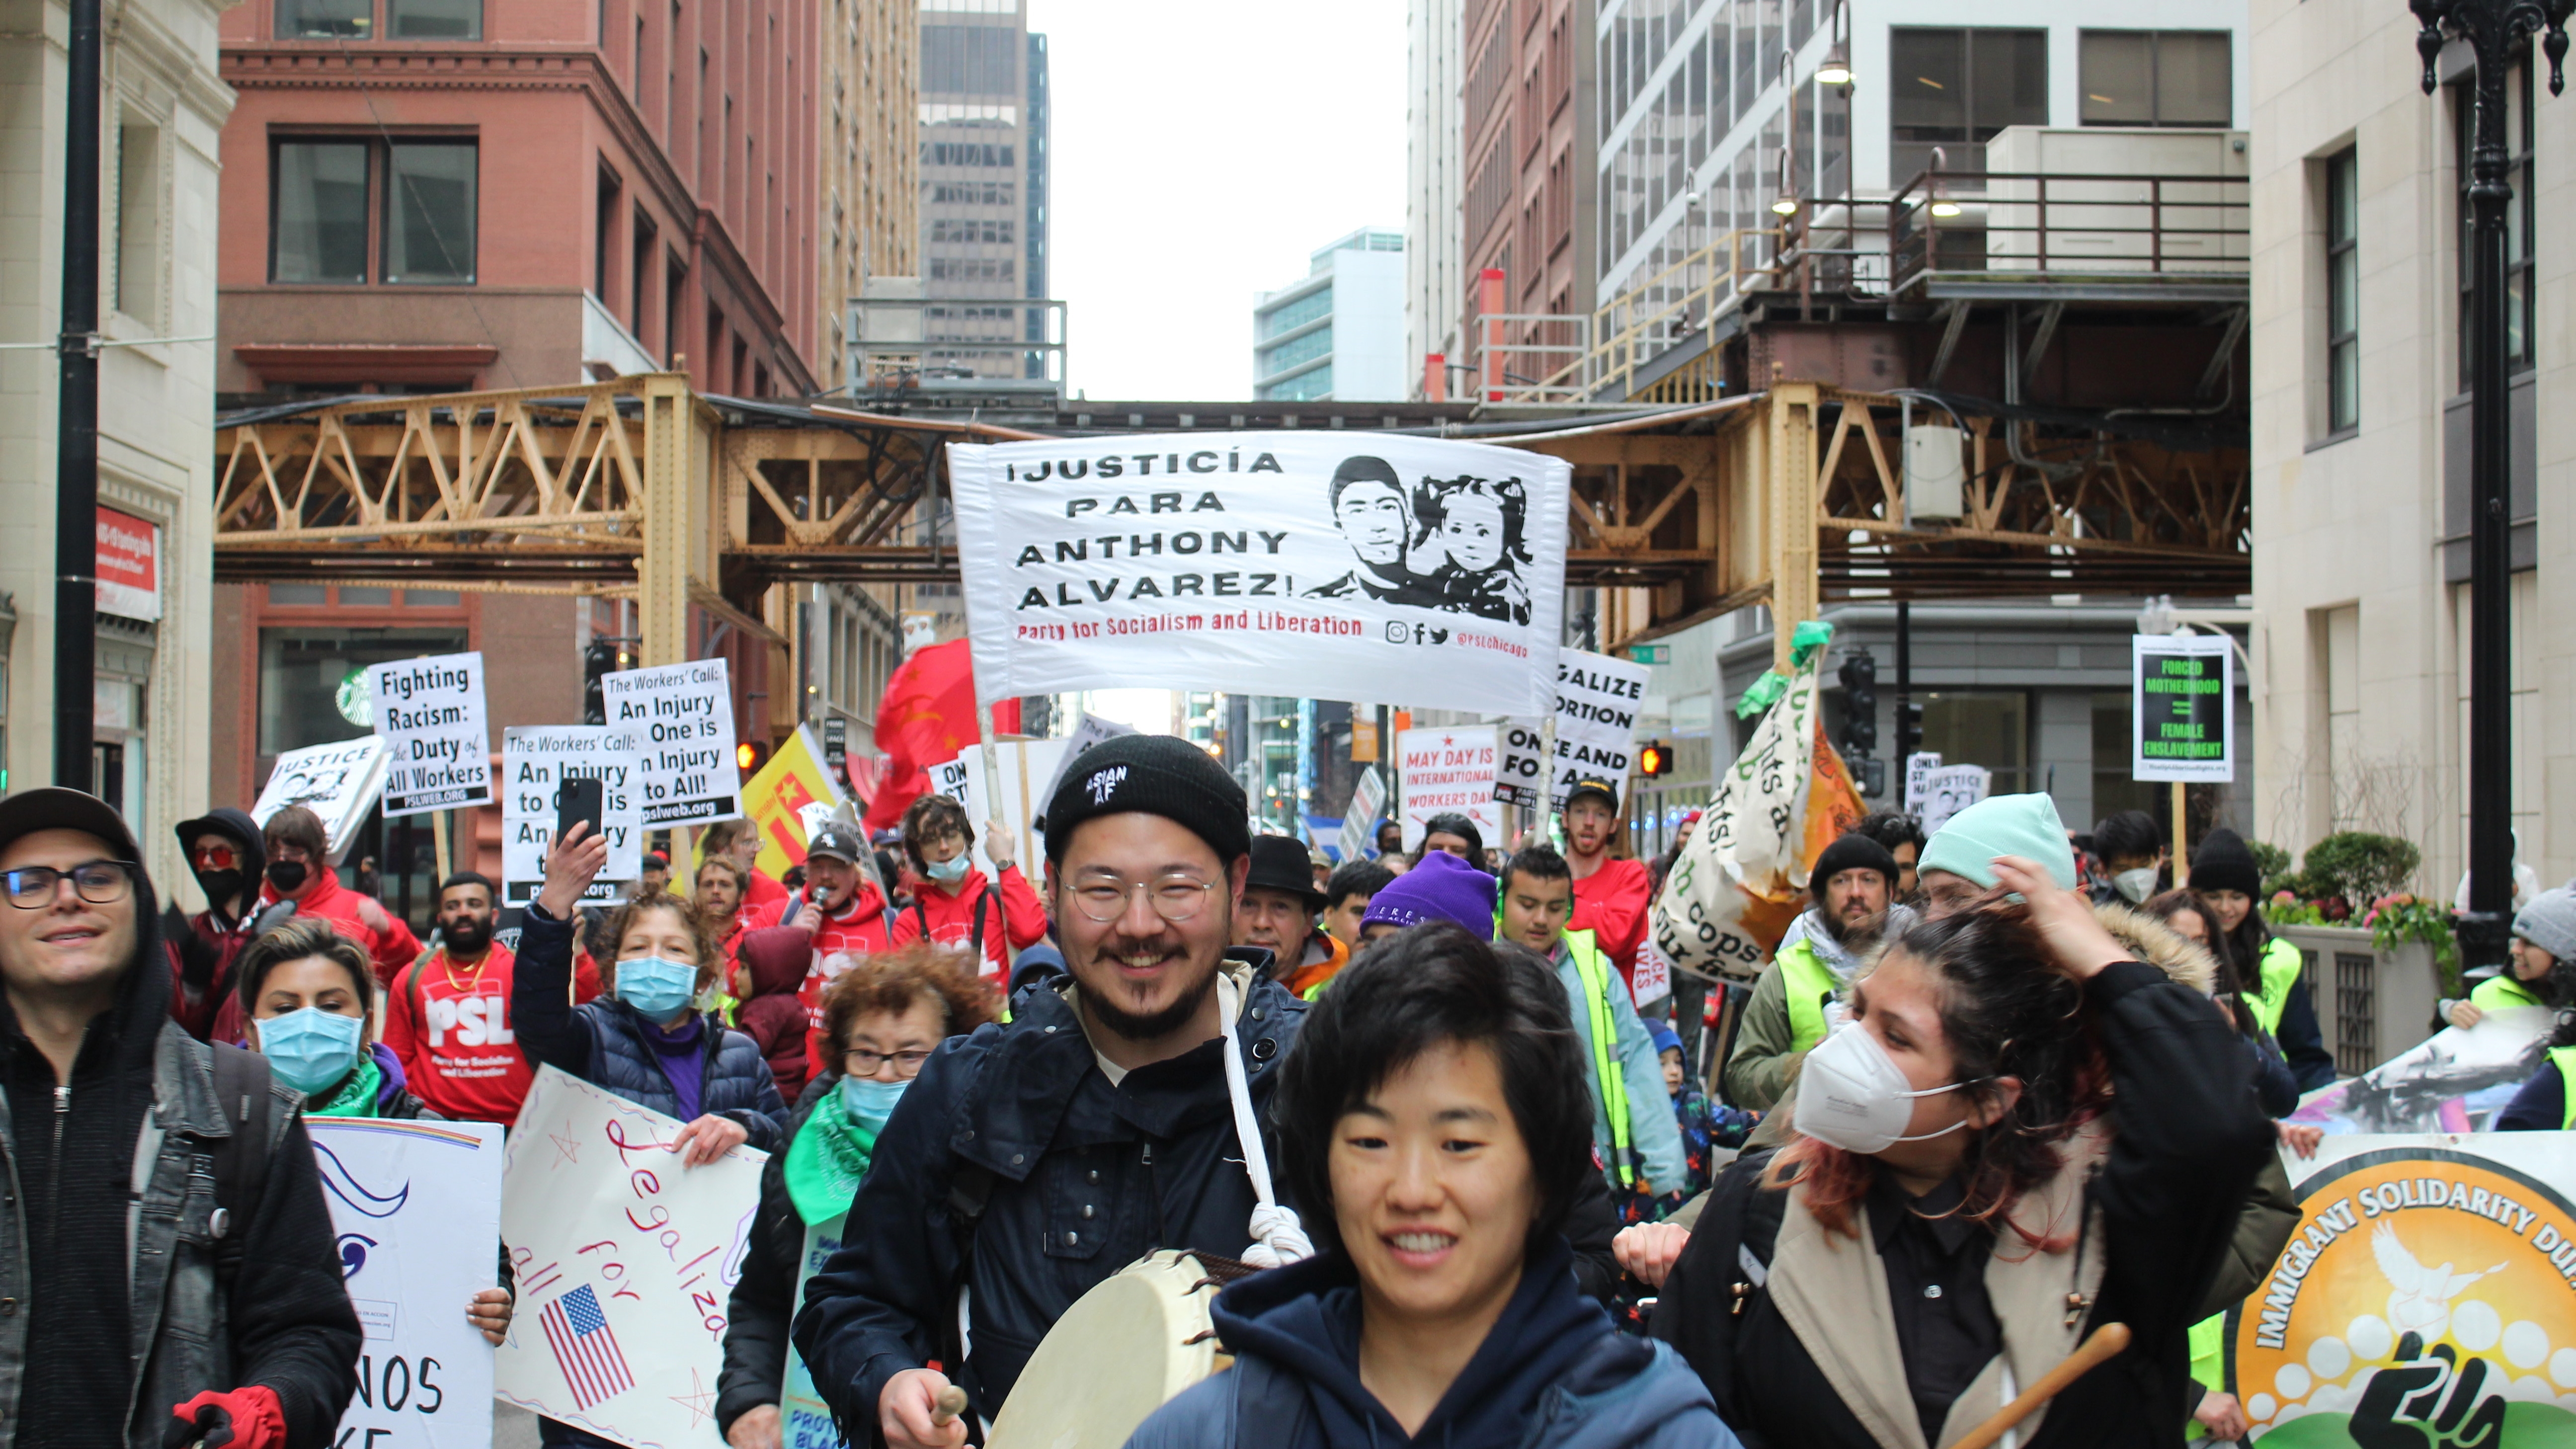 Demonstrators march through Downtown Chicago on May Day. Liberation photo